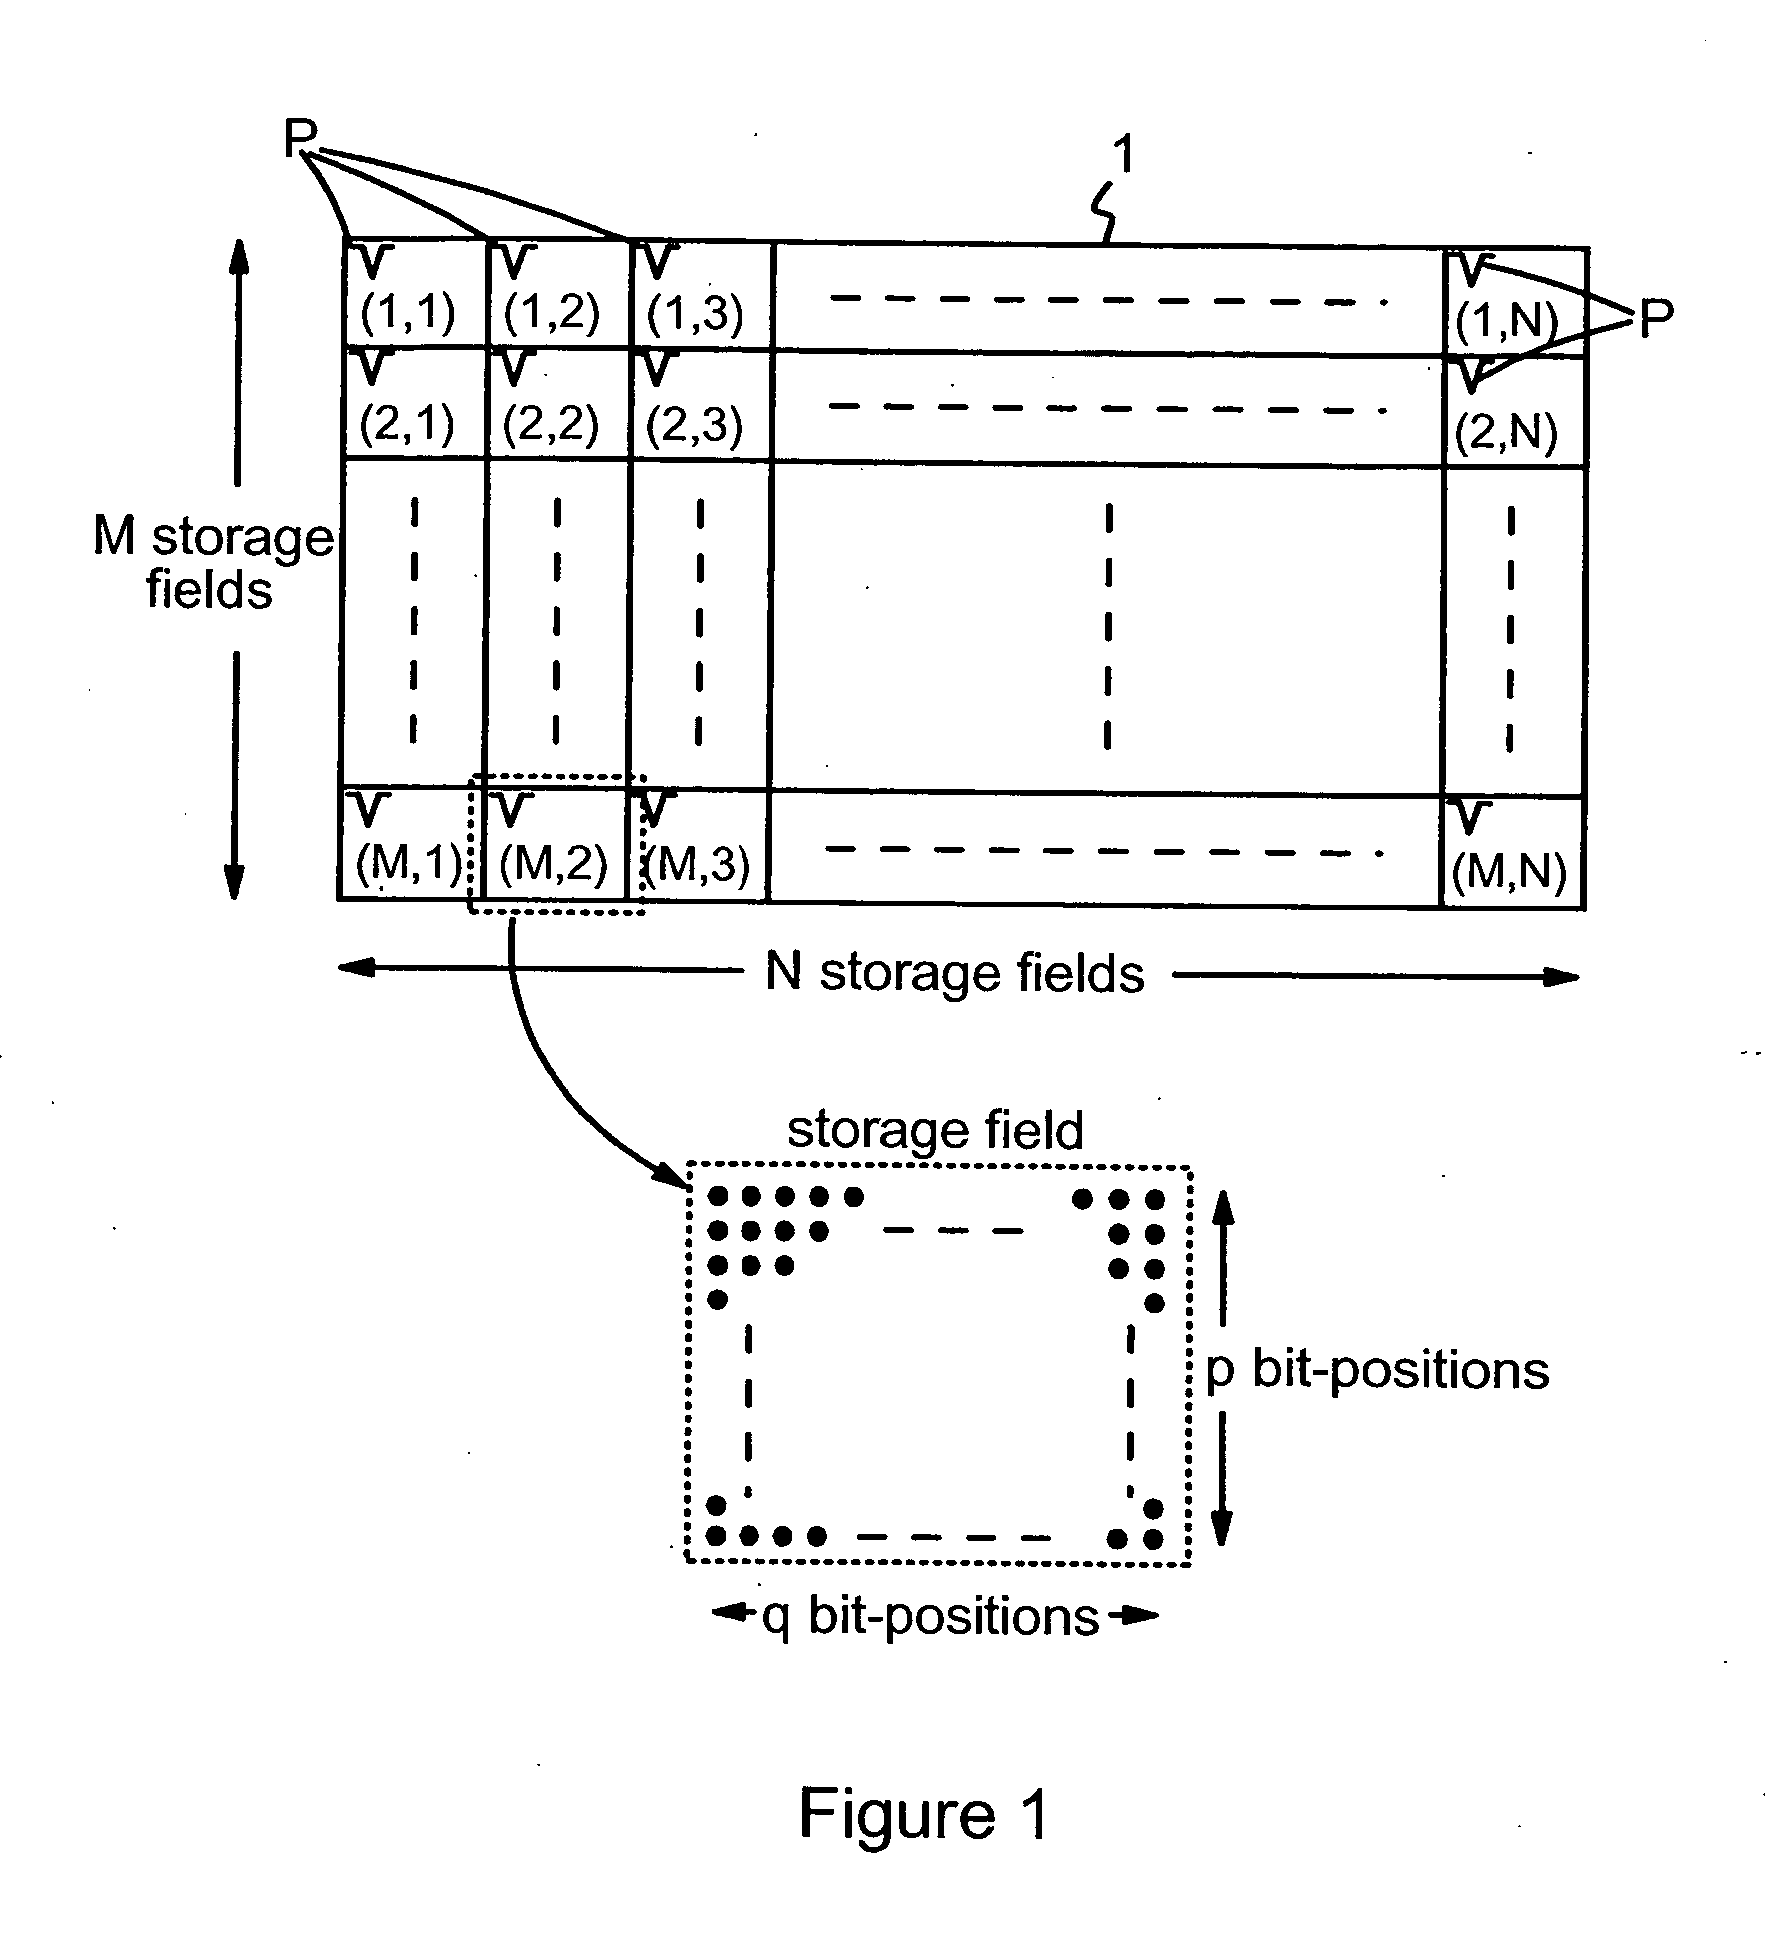 Writing and reading of data in probe-based data storage devices